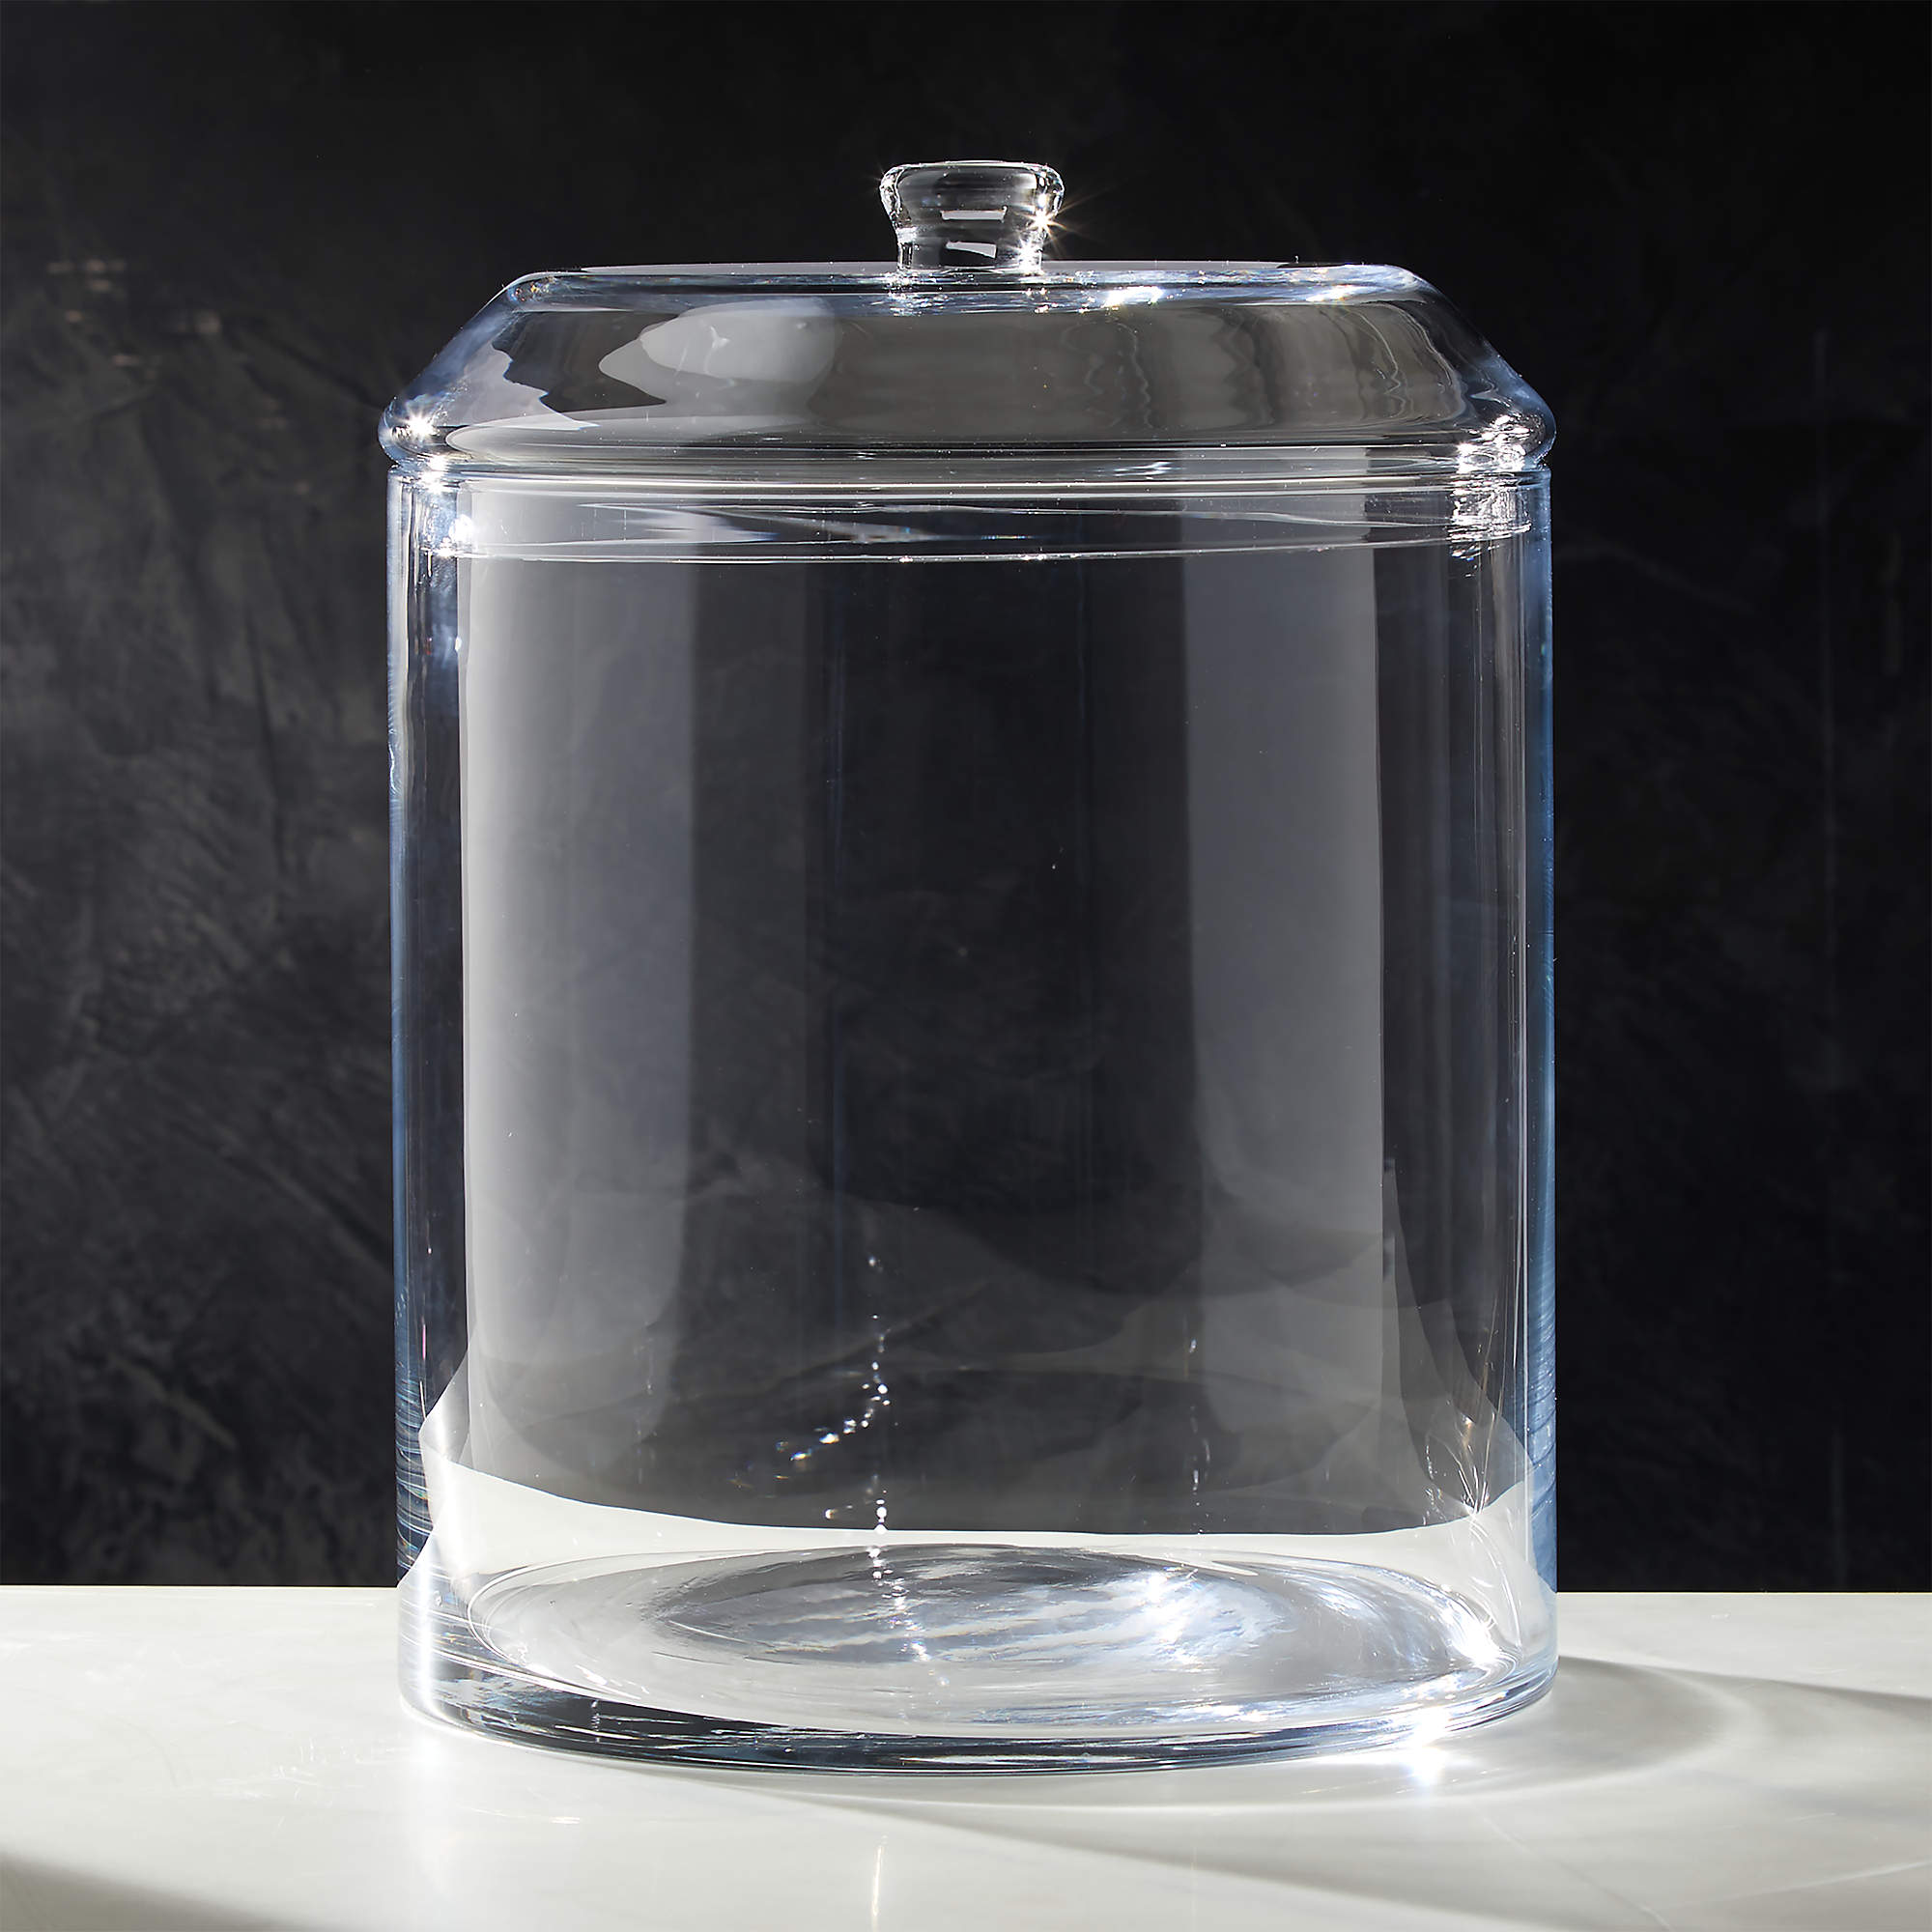 Shop LARGE SNACK GLASS CANISTER from CB2 on Openhaus